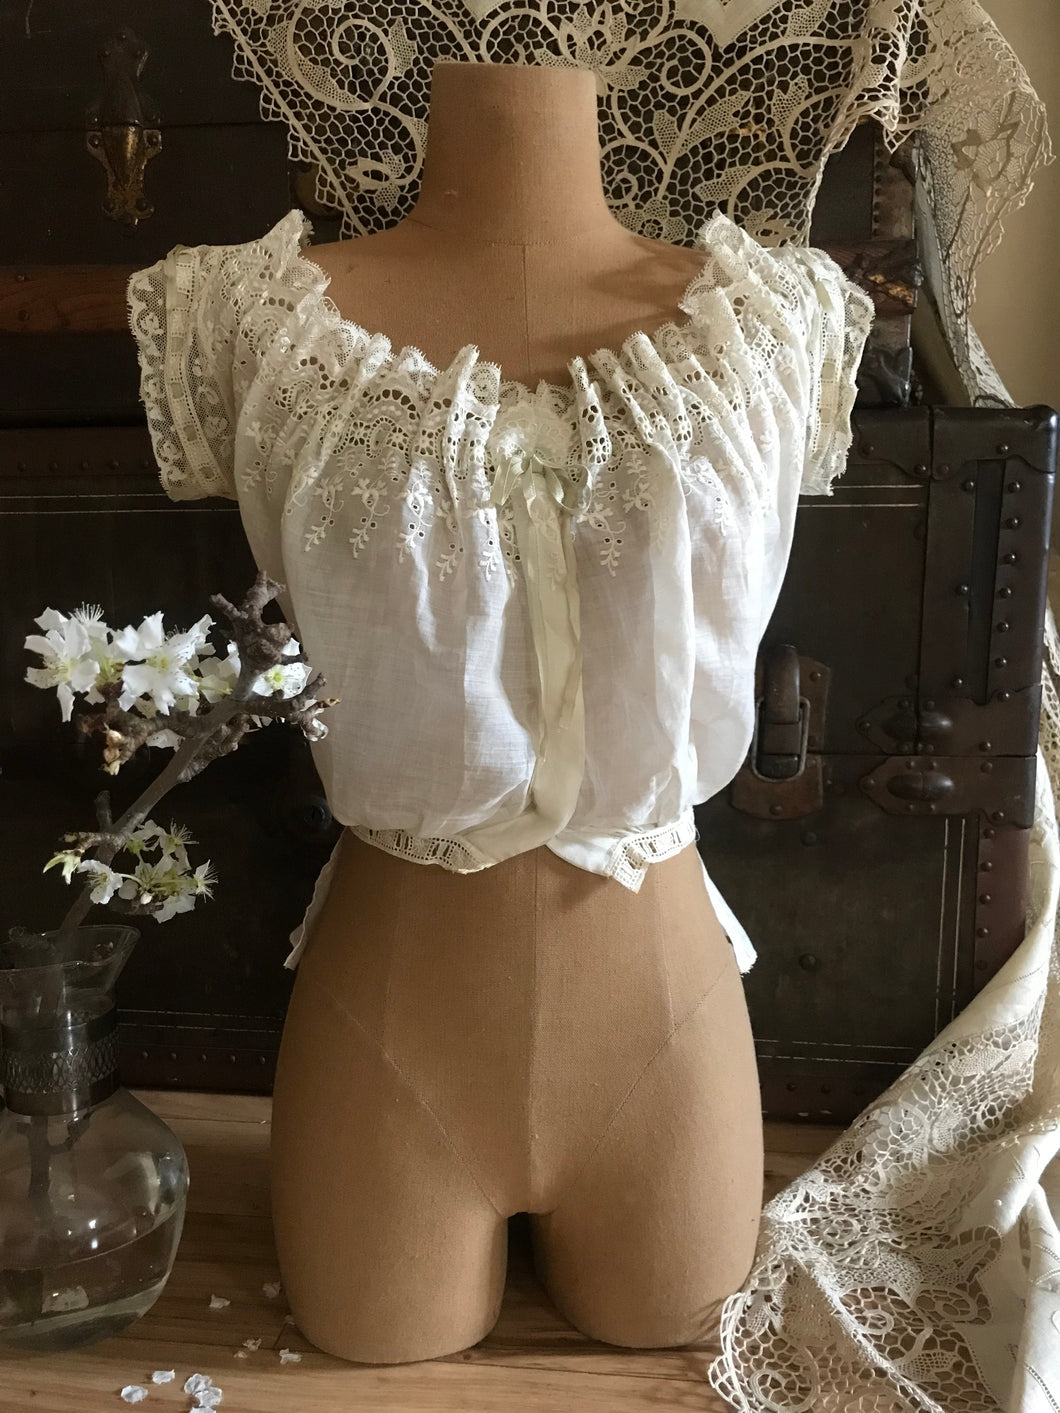 Antique Victorian embroidered eyelet corset cover